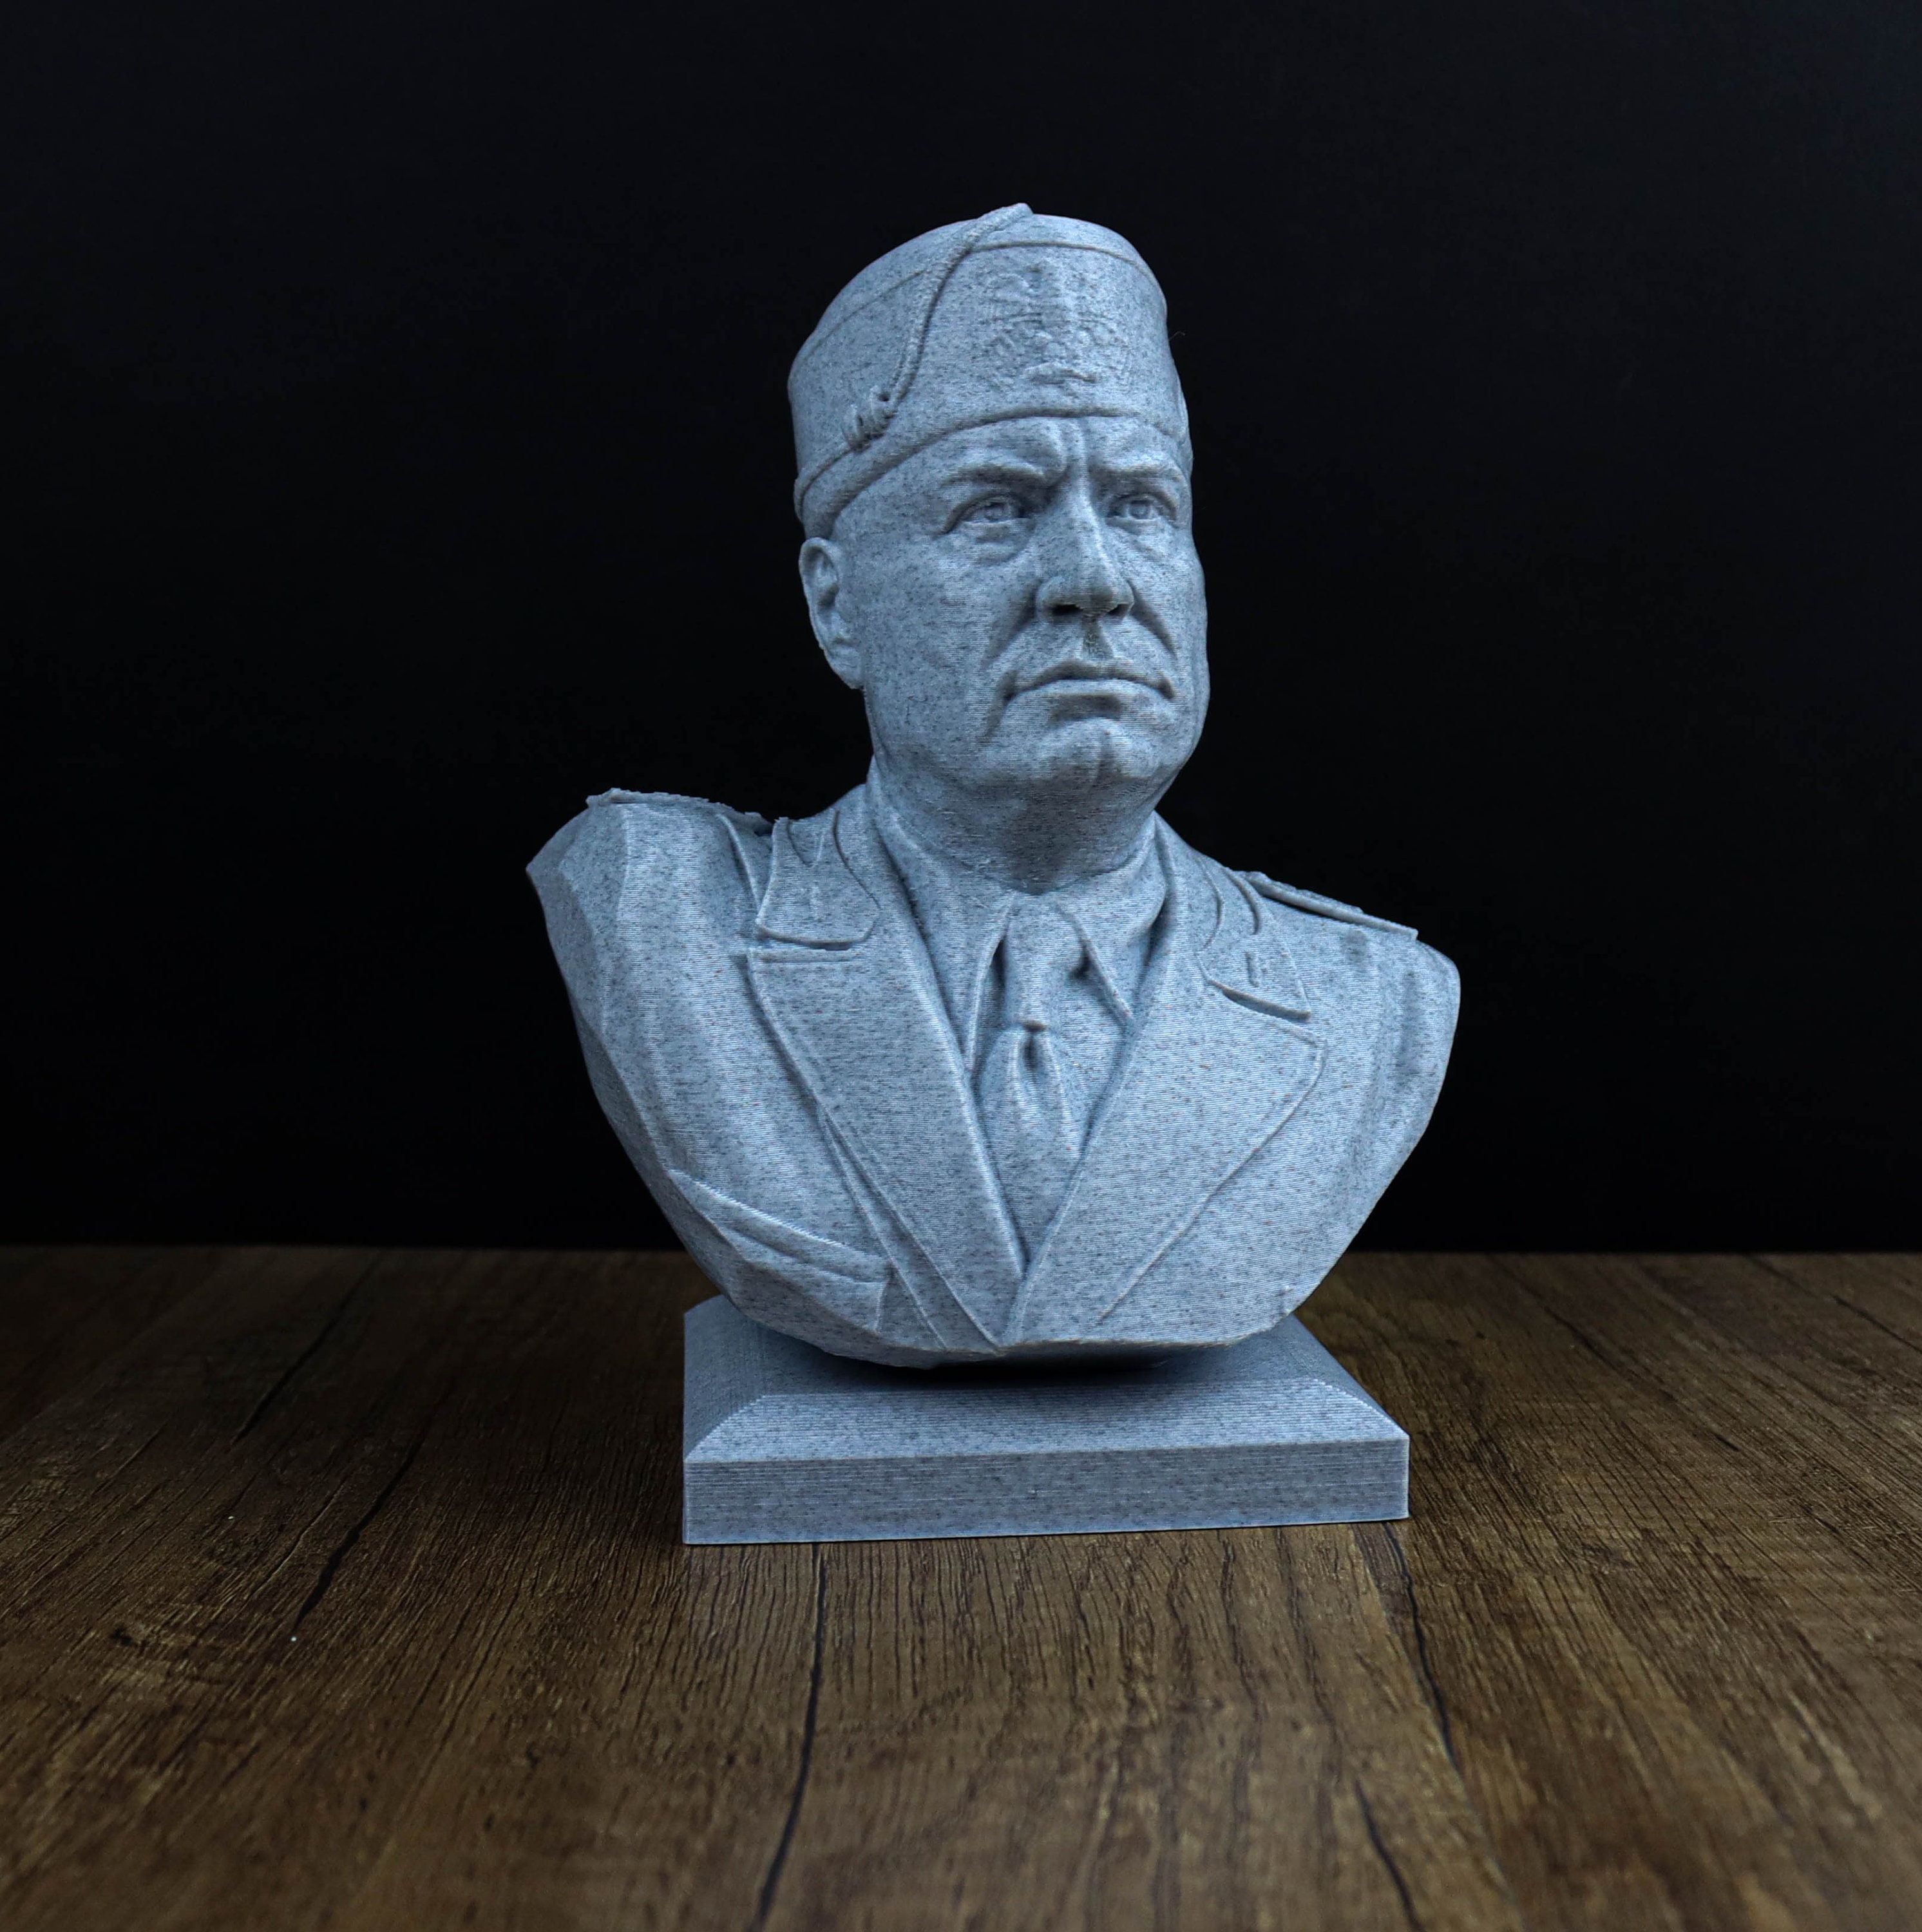 Benito Mussolini Bust, Il Duce Statue, Former Prime Minister of Italy 